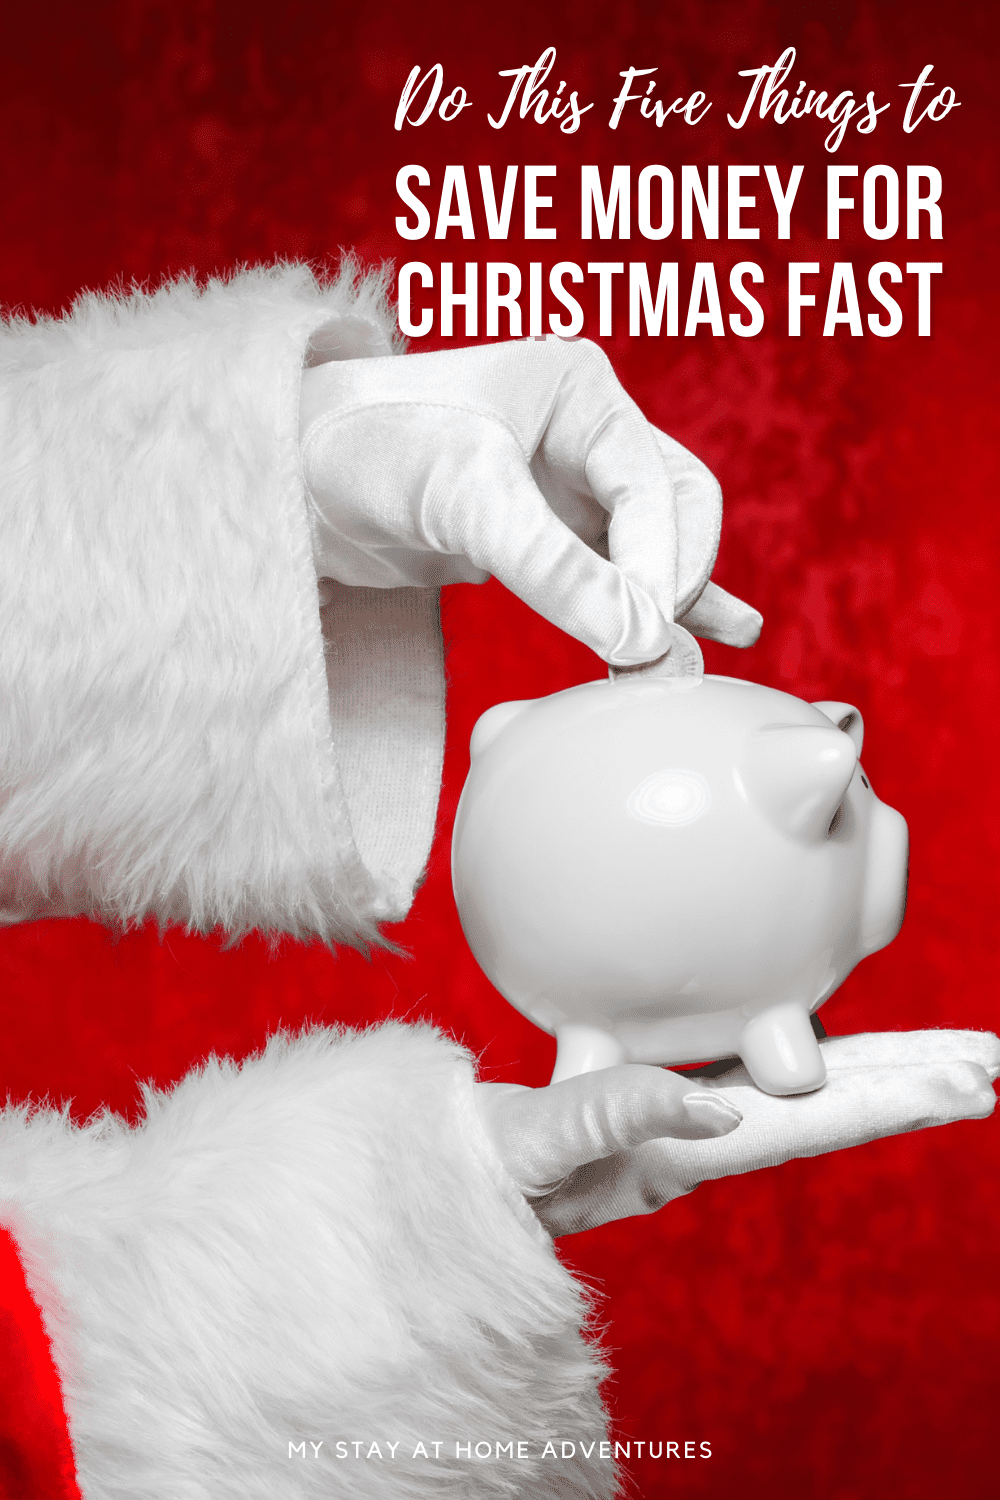 Want to save money for Christmas? Here are some easy tips to help you get your finances in order and have a Merry Christmas! via @mystayathome